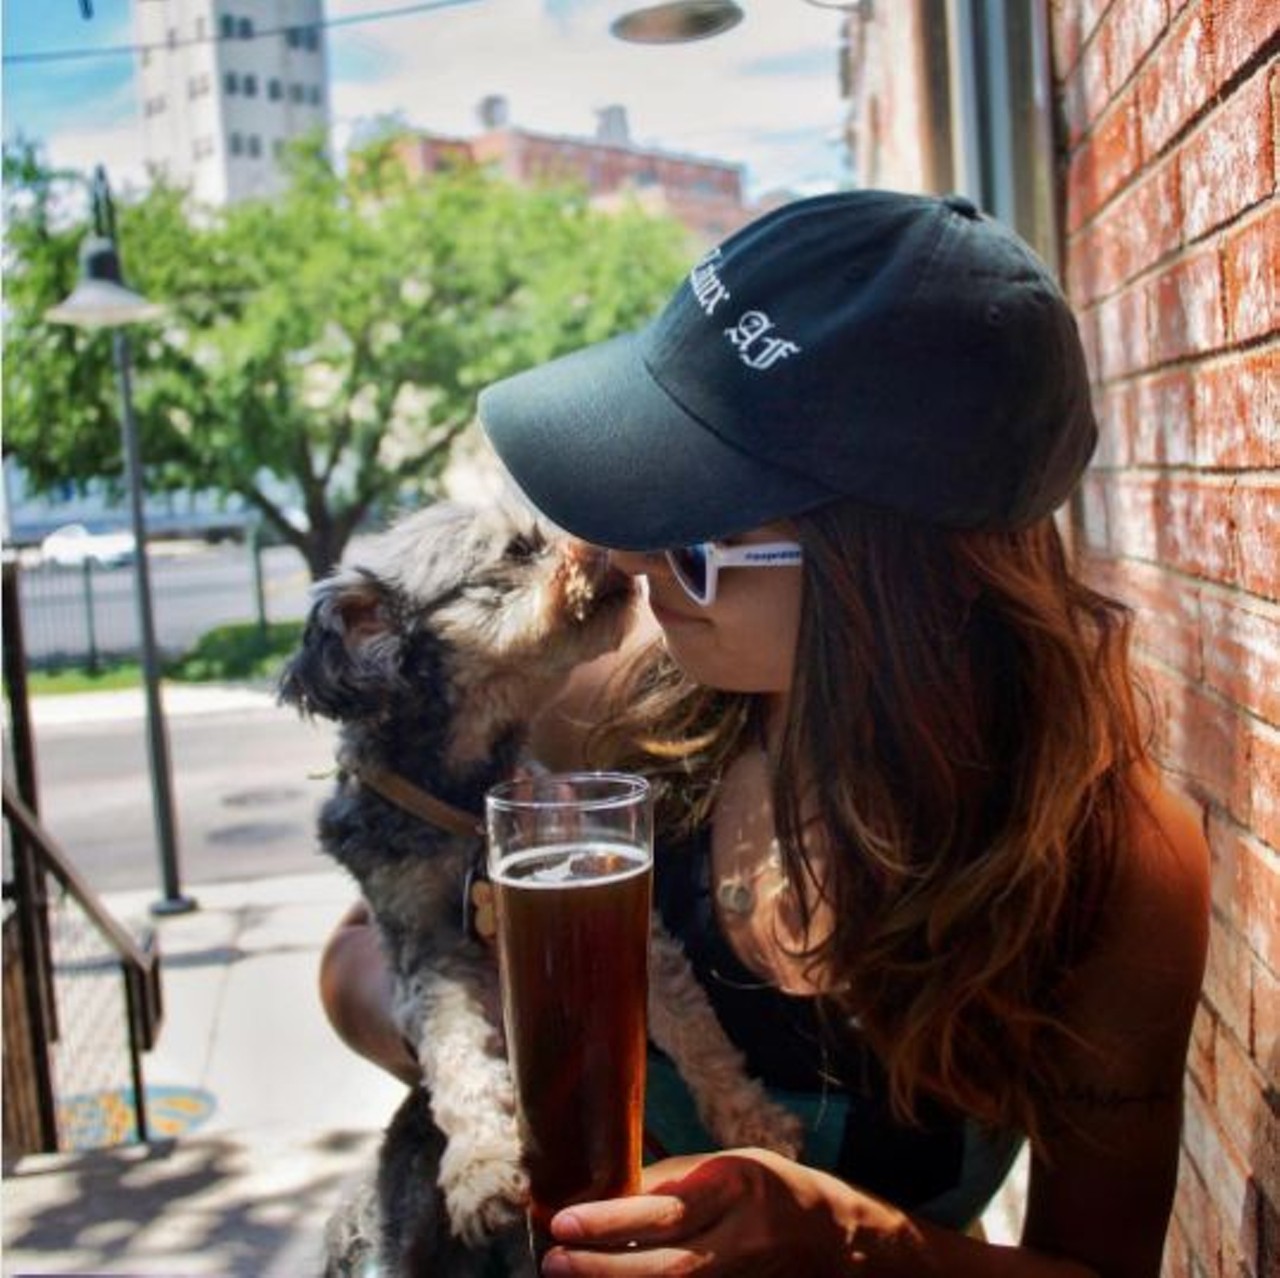 Stella Public House  
1414 S. Alamo St., (210) 277-7047 
Both you and your pet will love the time you spend at Stella Public House.
Photo via Instagram,yoshimaru12